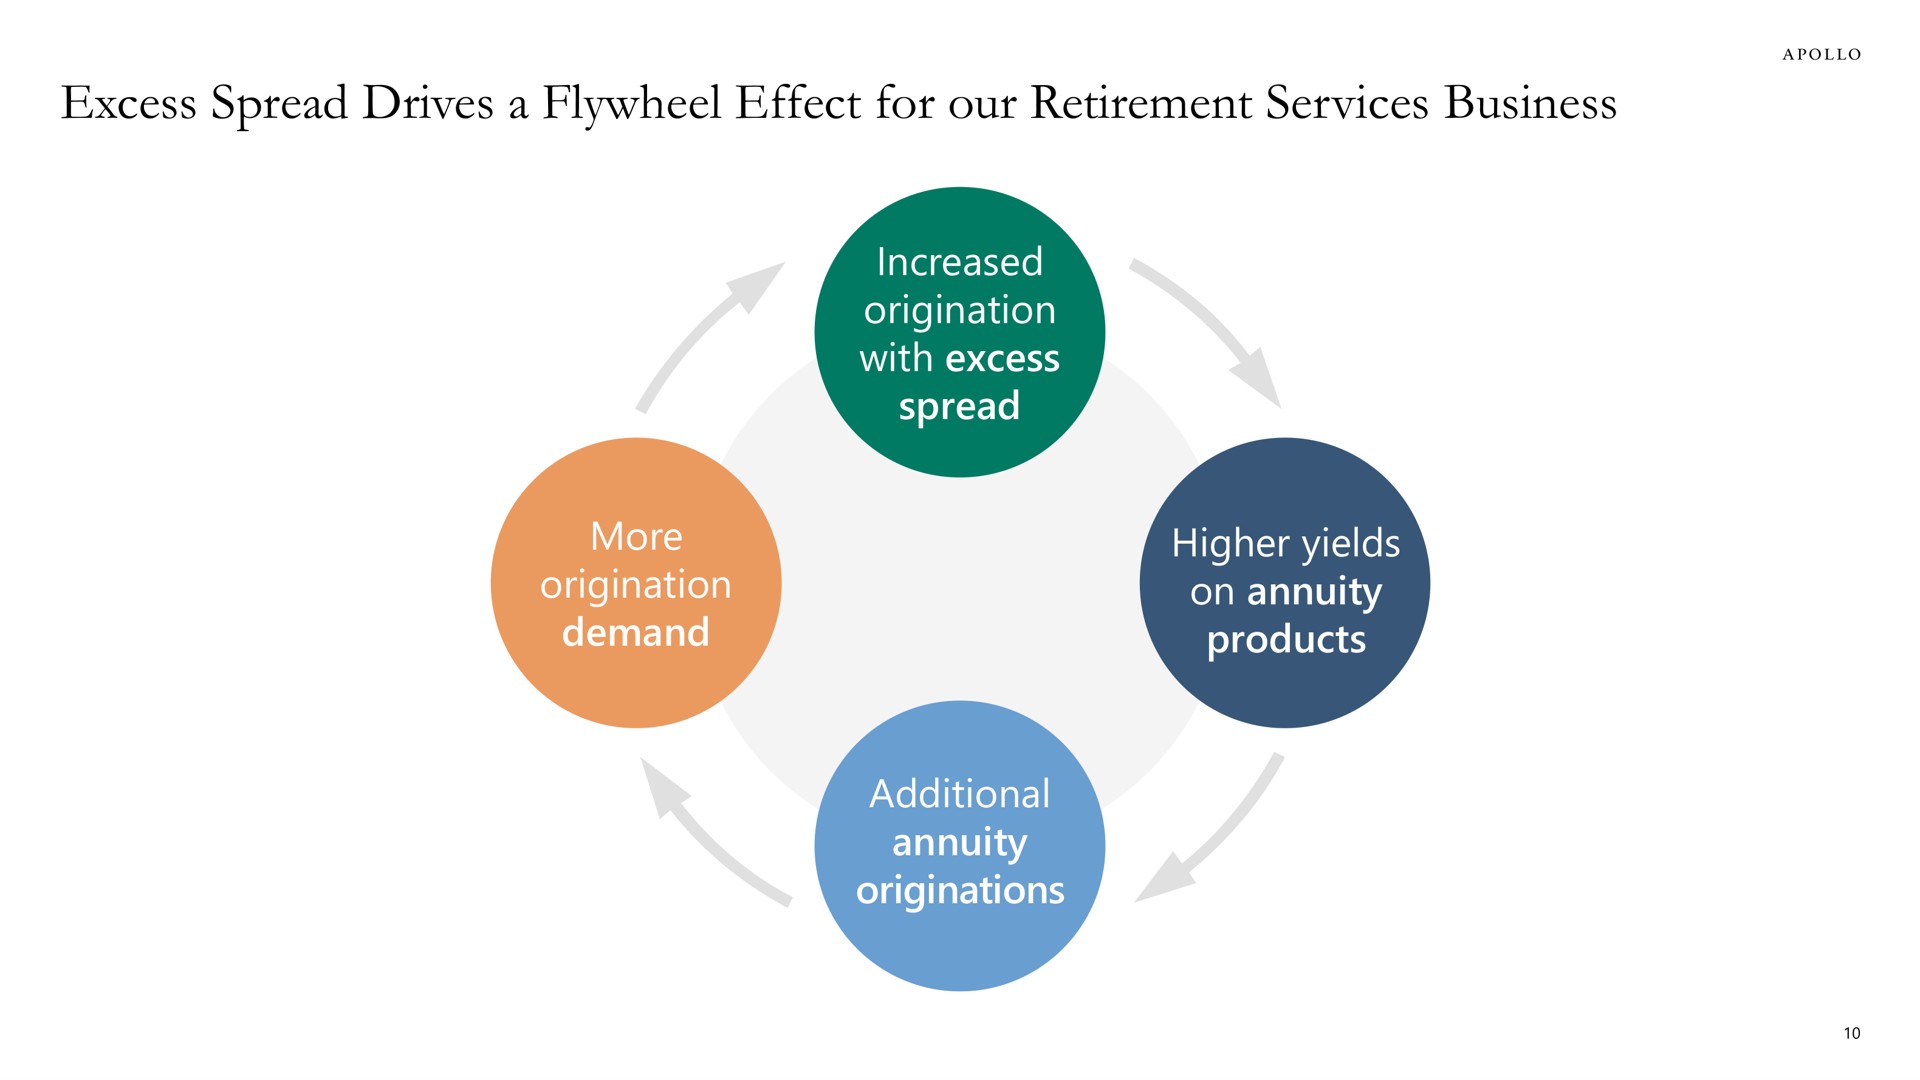 excess spread drives a flywheel effect for our retirement services business | Apollo Global Management